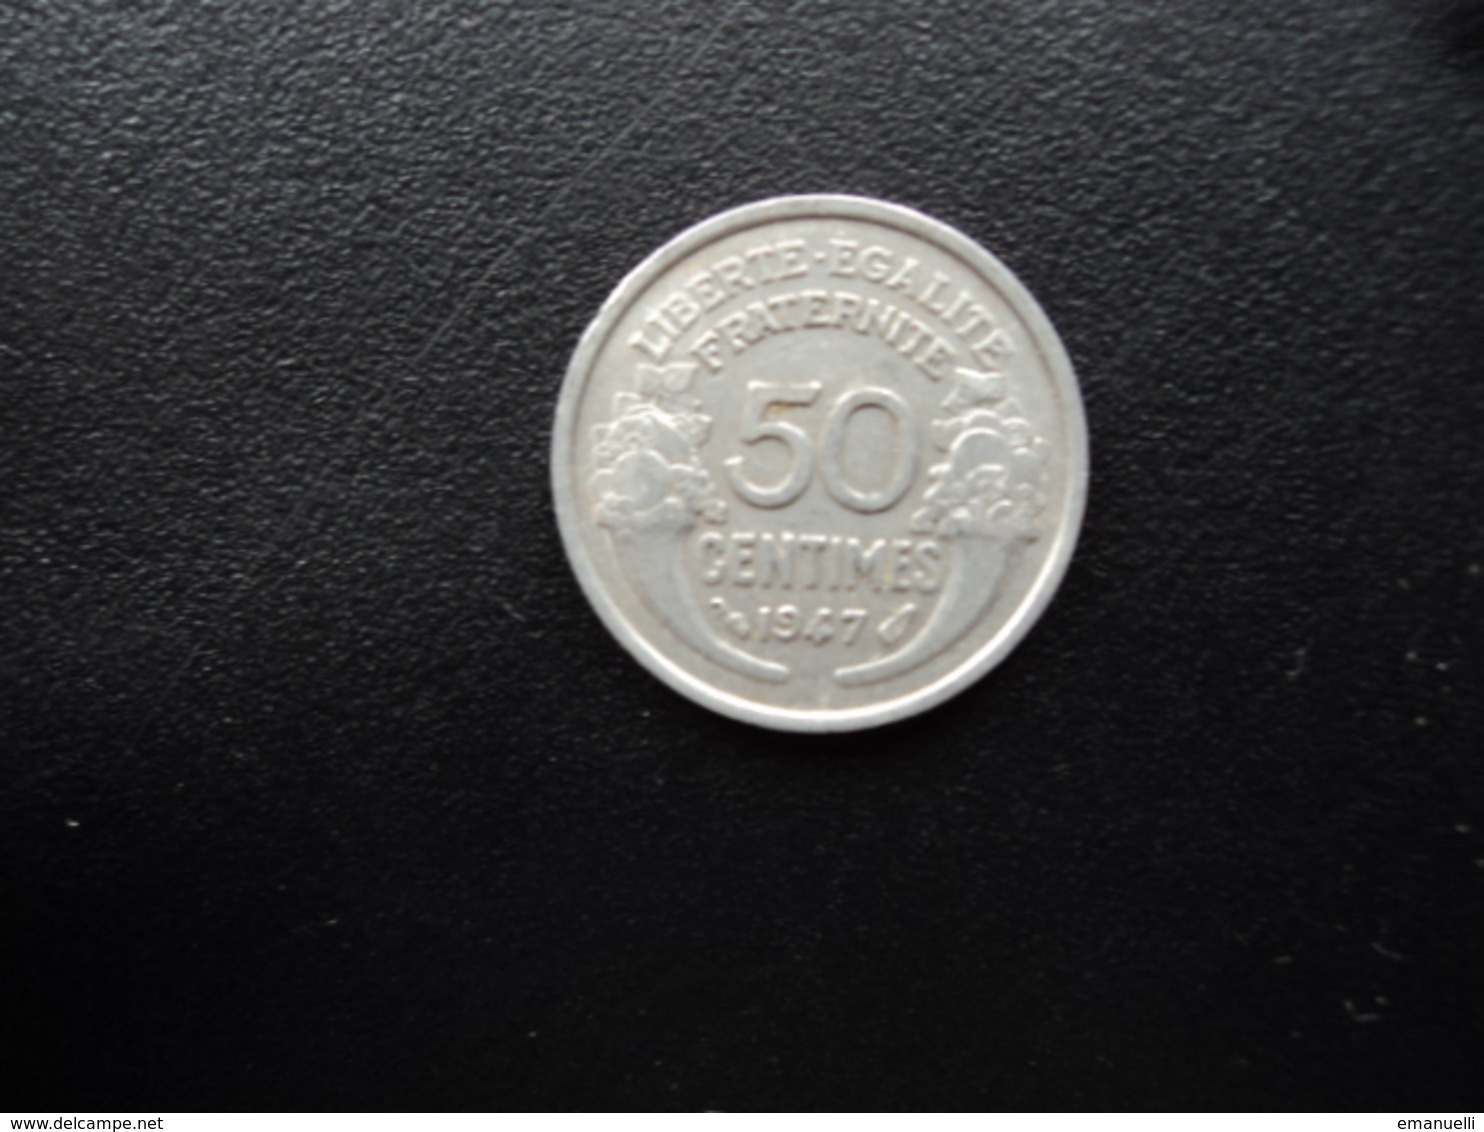 FRANCE : 50 CENTIMES   1947    F.194 / G.426b / KM 894a.1     SUP - 50 Centimes